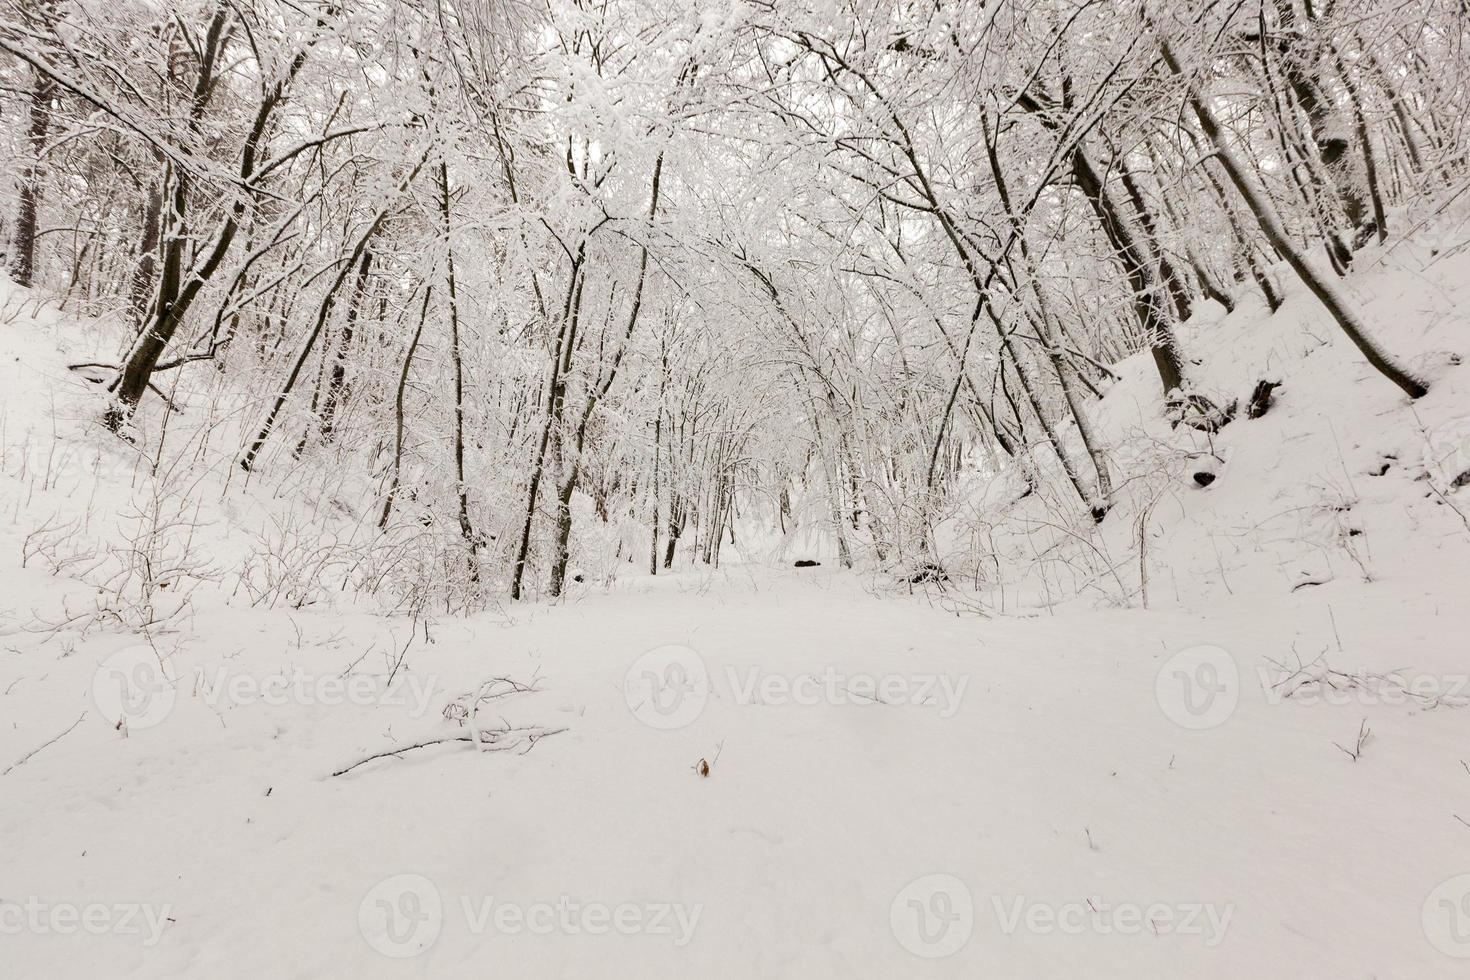 bare deciduous trees in the snow in winter photo